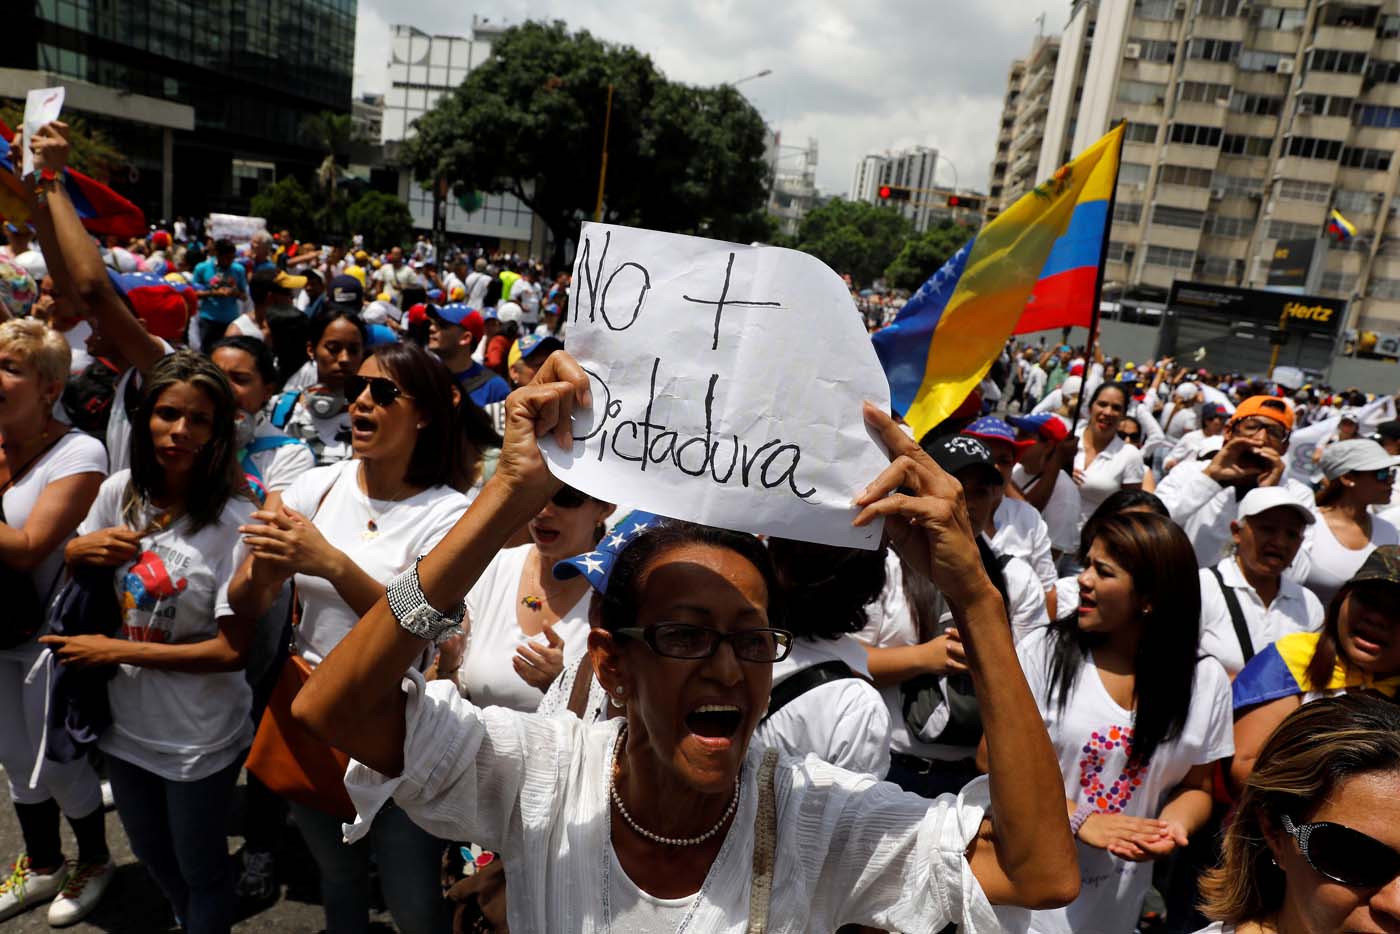 A woman holds up a placard that reads "No more dictatorship" during a women's march to protest against President Nicolas Maduro's government in Caracas, Venezuela, May 6, 2017. REUTERS/Carlos Garcia Rawlins